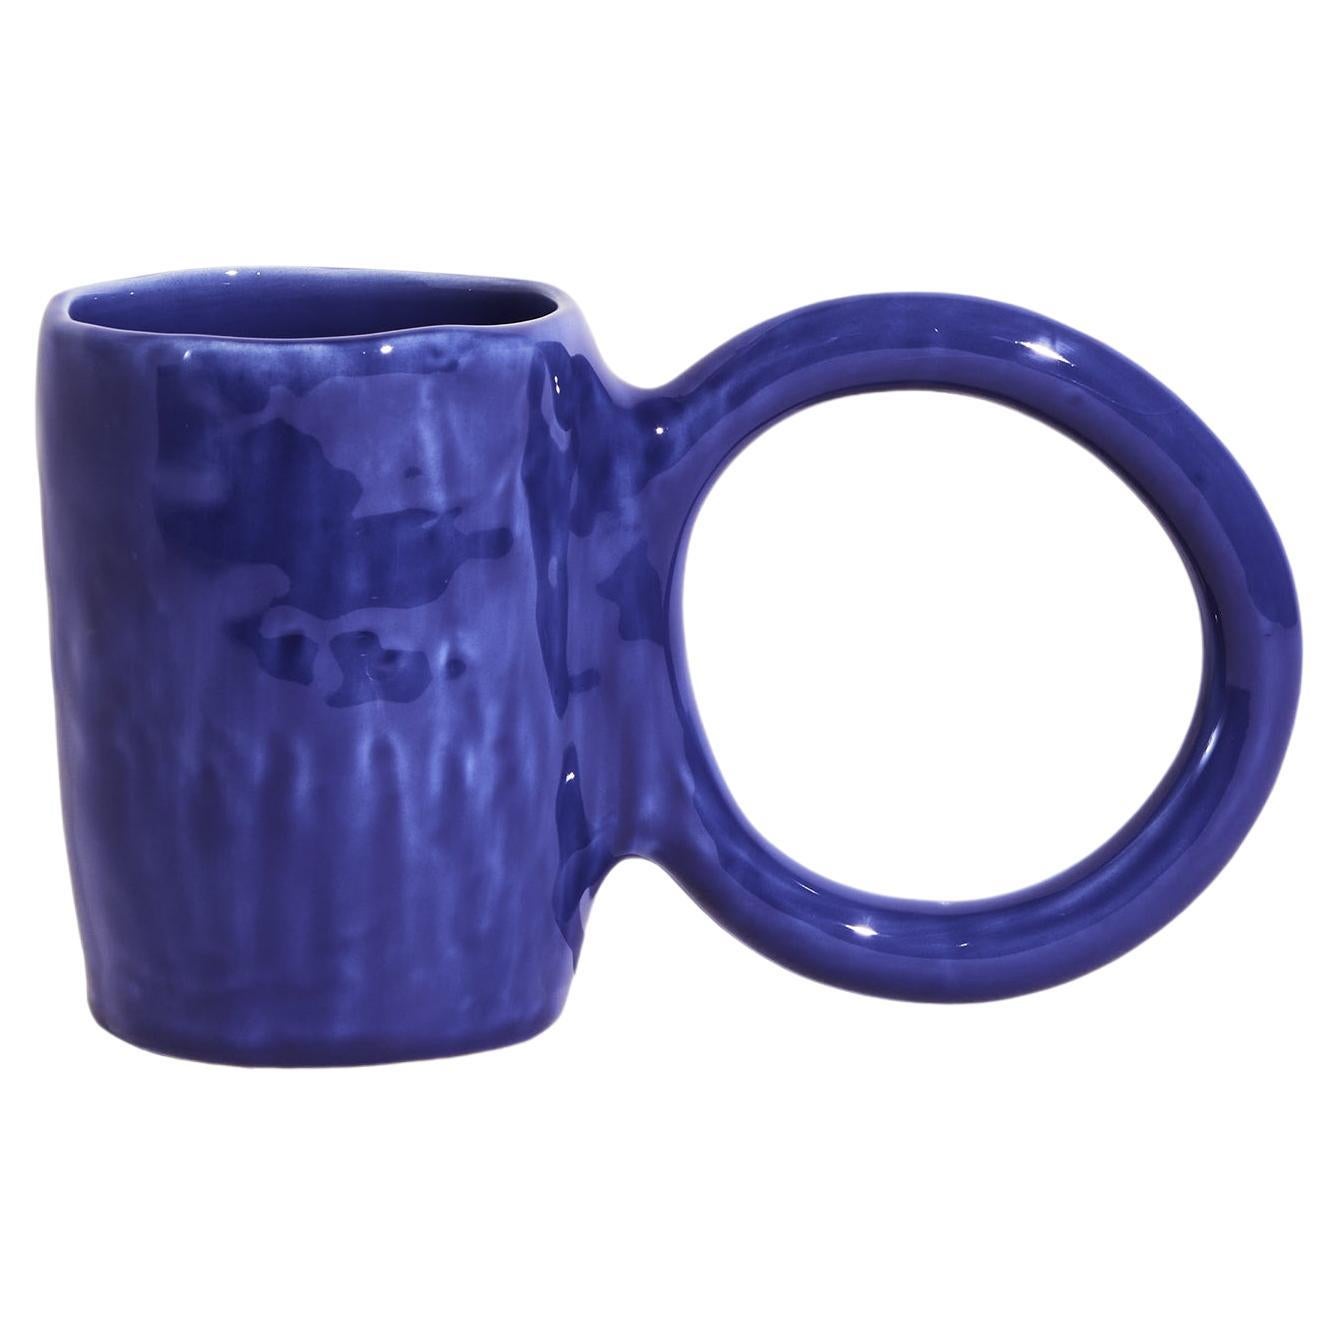 PETITE FRITURE Donut, Large Mug, Blue, Designed by Pia Chevalier For Sale